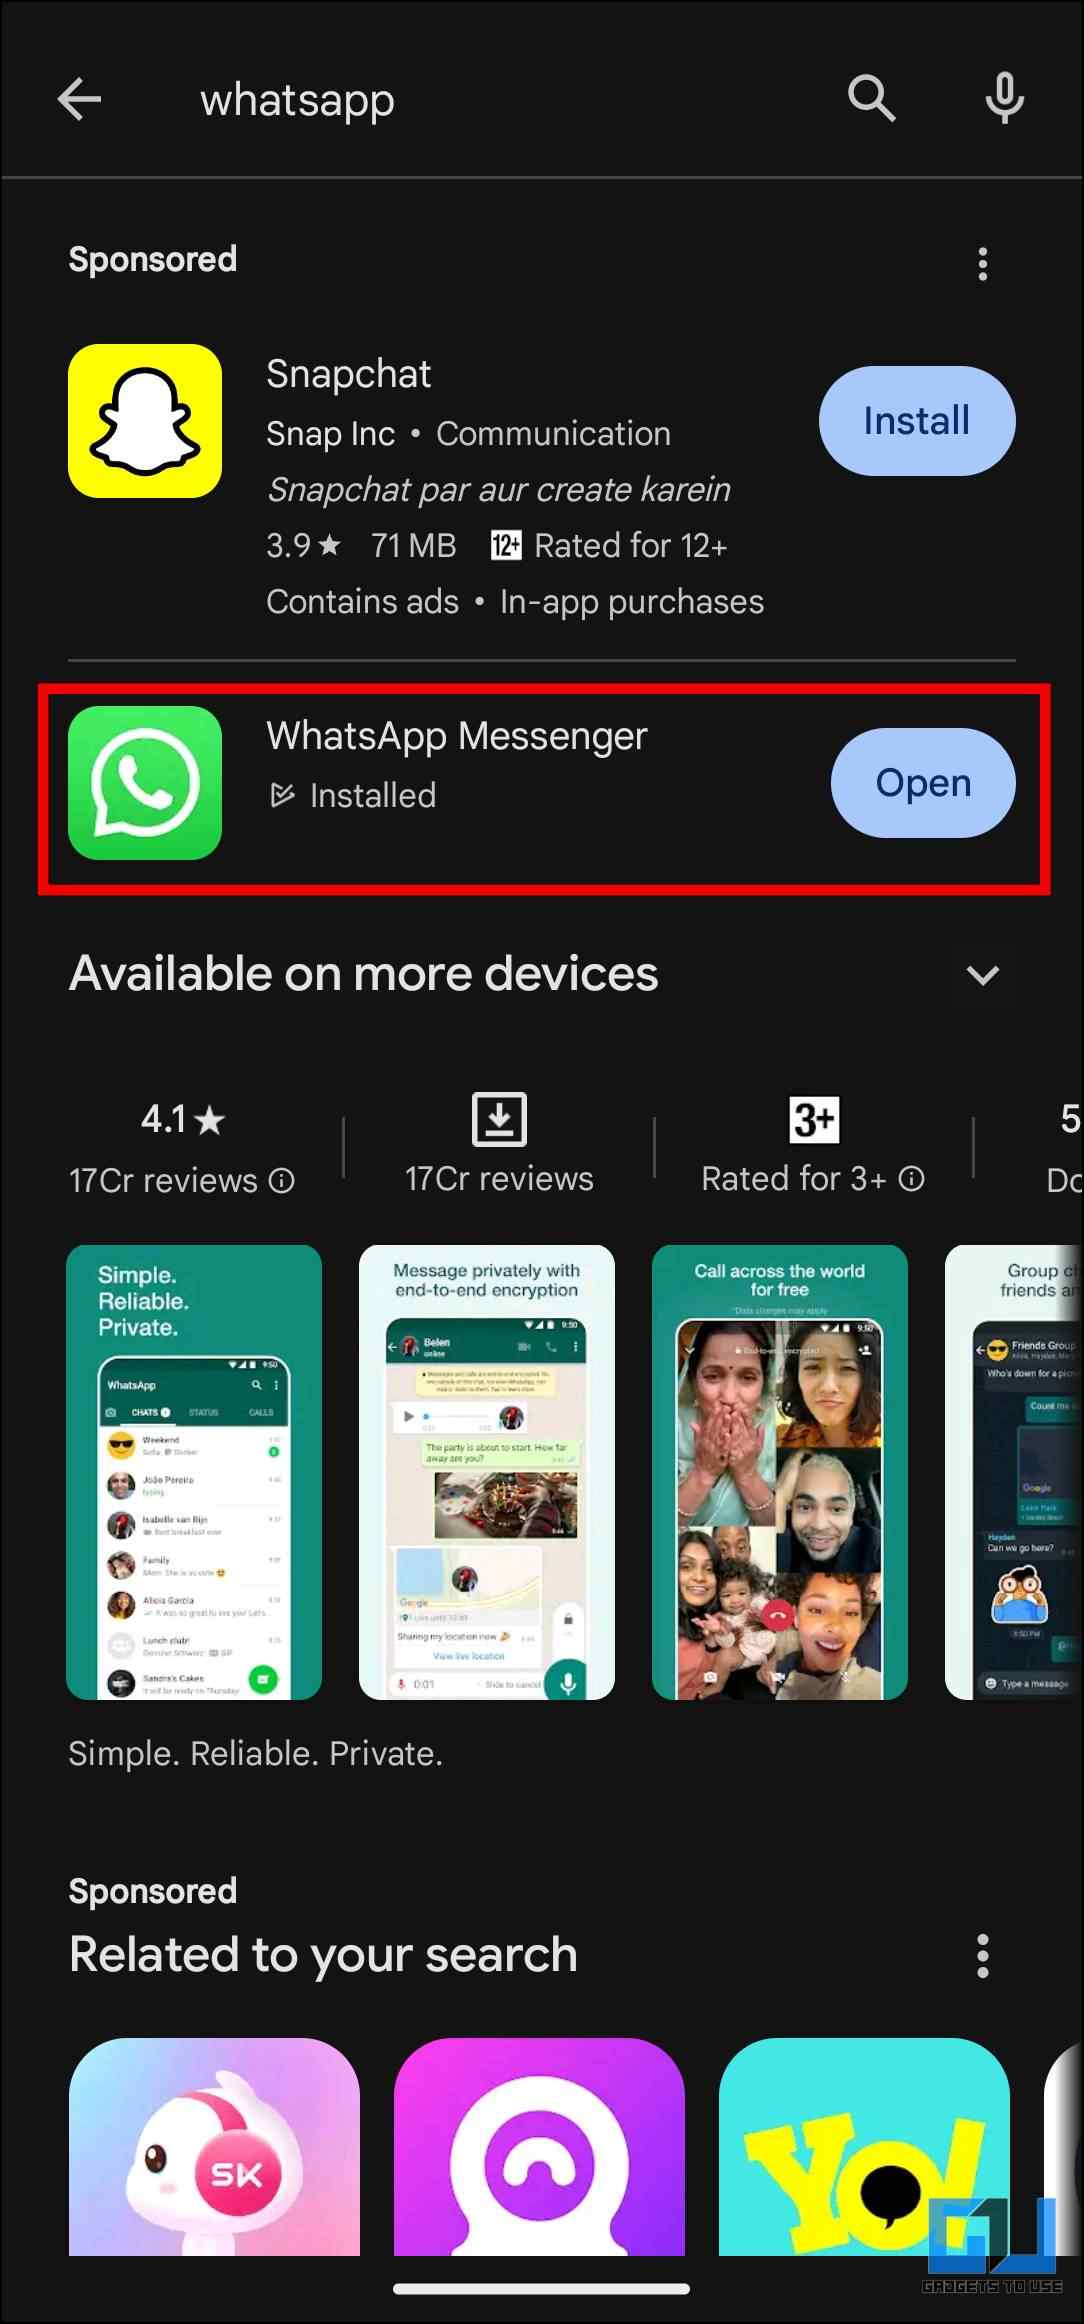 Go to the WhatsApp Messenger App Page